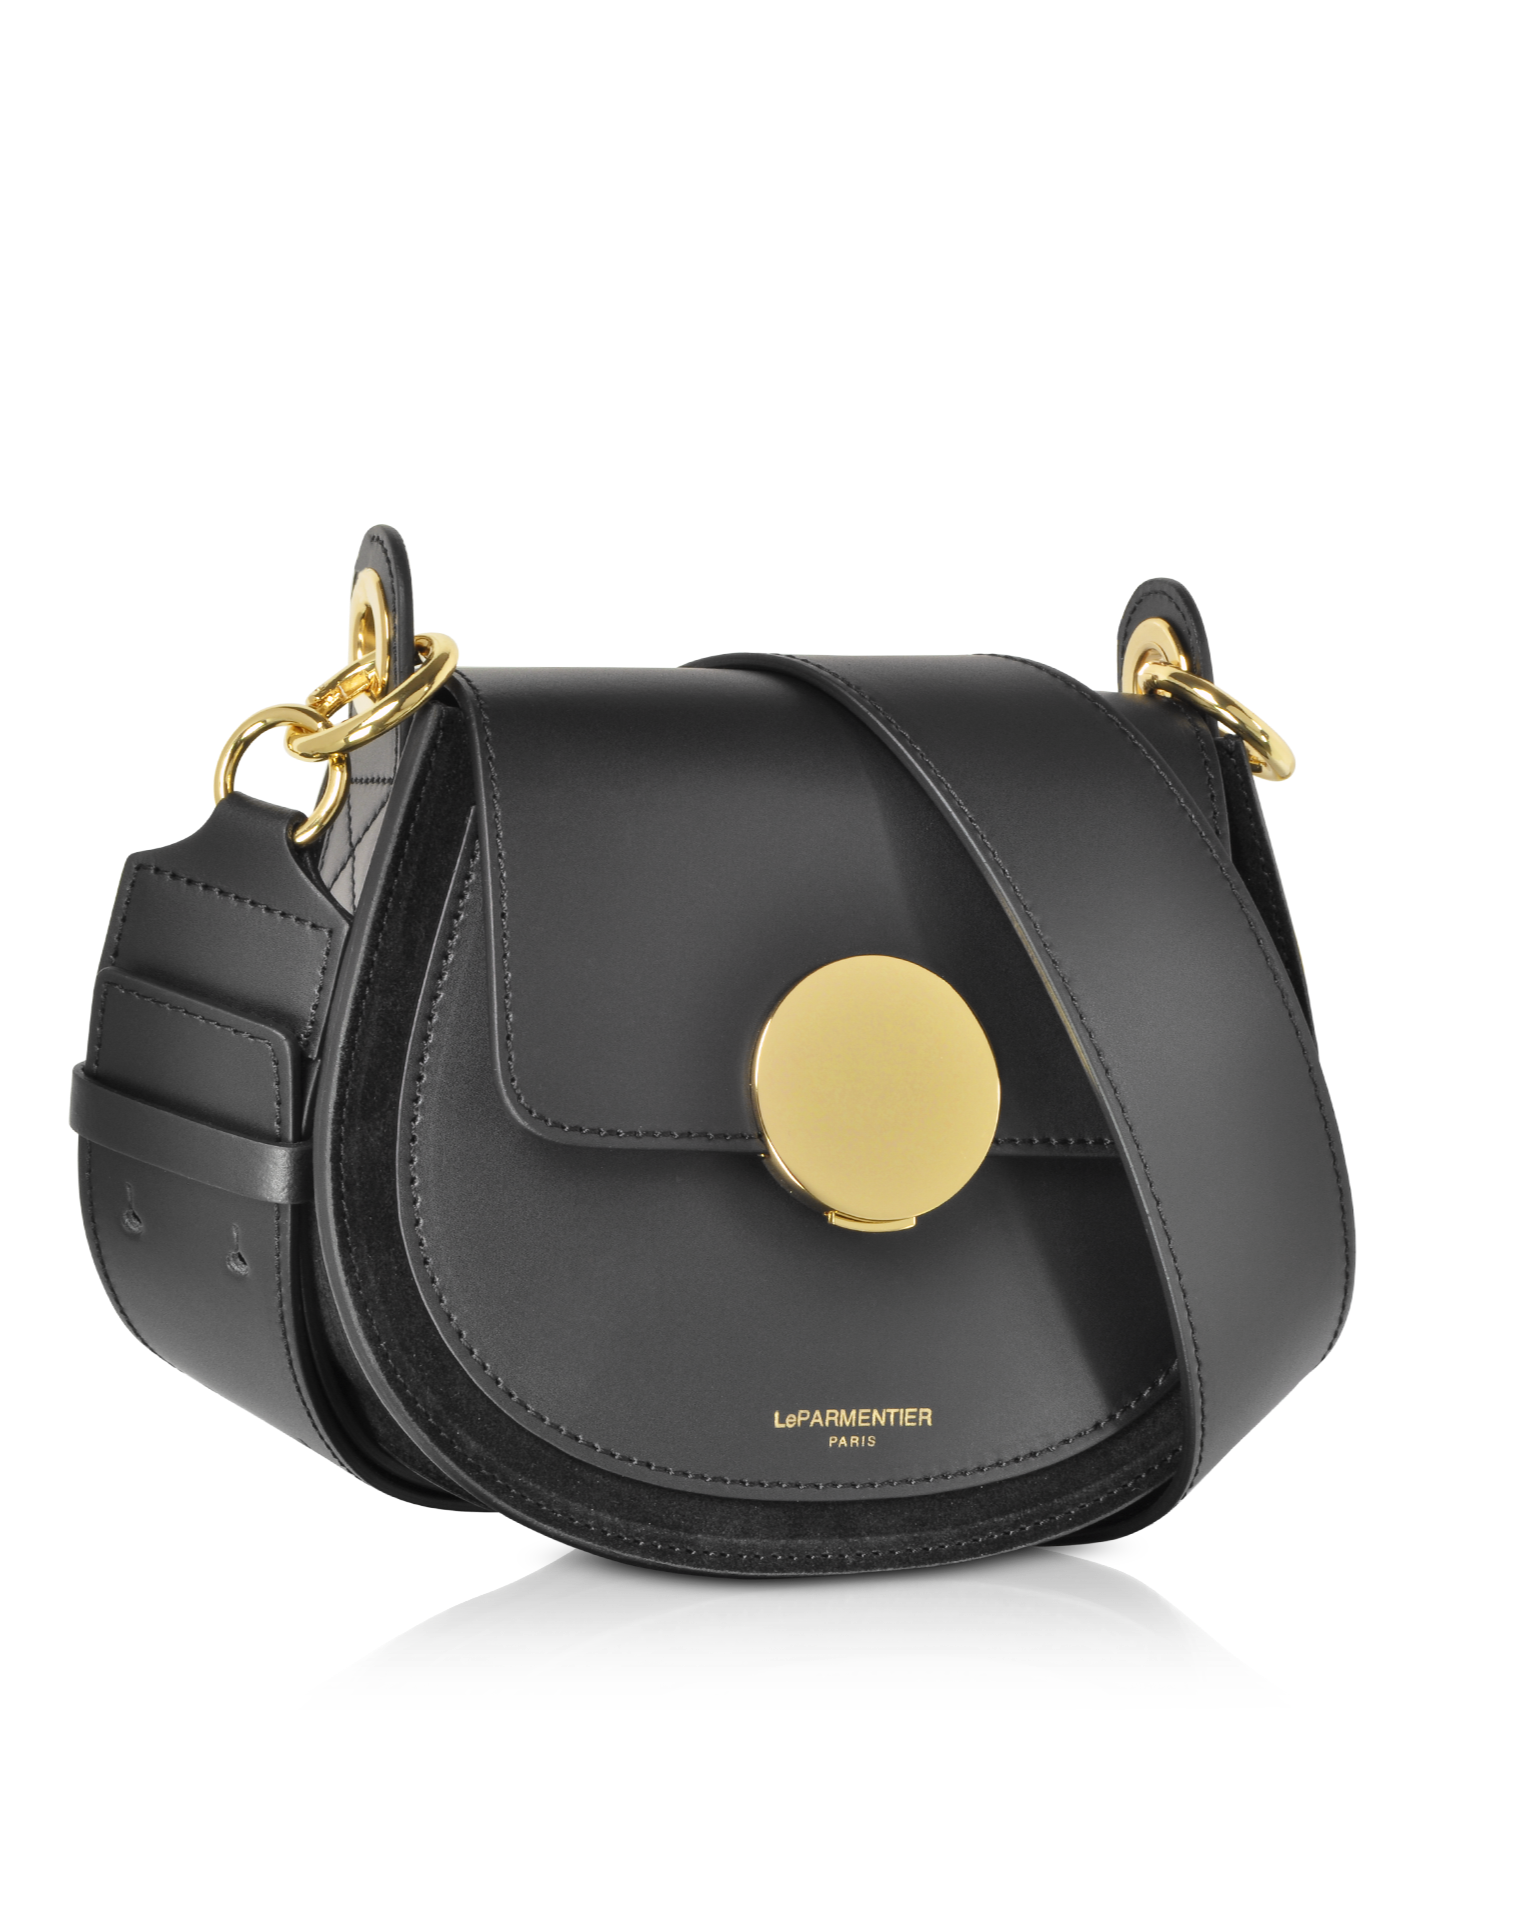 Yucca Shoulder Bag by Le Parmentier at Mazzi d Fiori is crafted in smooth genuine Italian calf leather and velvety suede, pulls out all the stops with its updated take on the classic saddle silhouette that keeps you discreetly organised all the day through to casual fun nights. Featuring flap top magnetic snap closure with bold hardware detail, adjustable wide shoulder strap and gold tone hardware detail